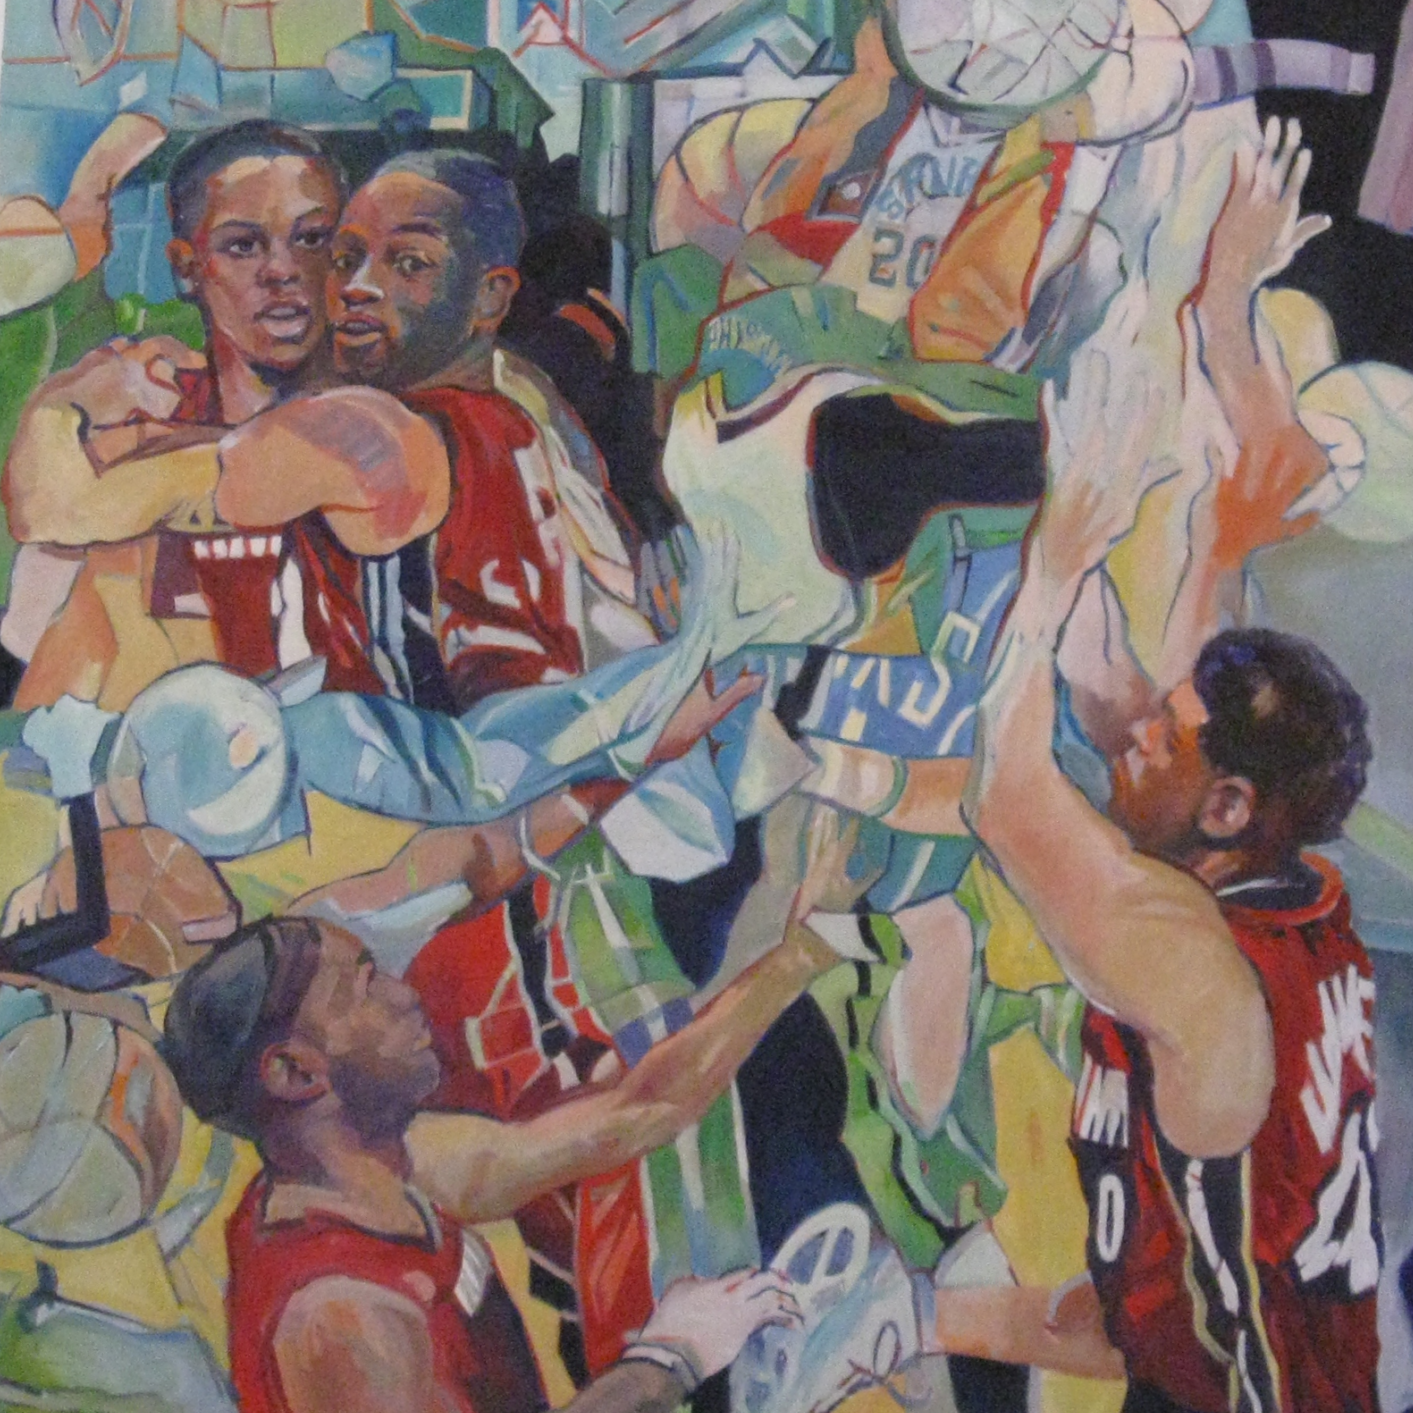 Painting of men involved in basketball. Has a collage feeling.